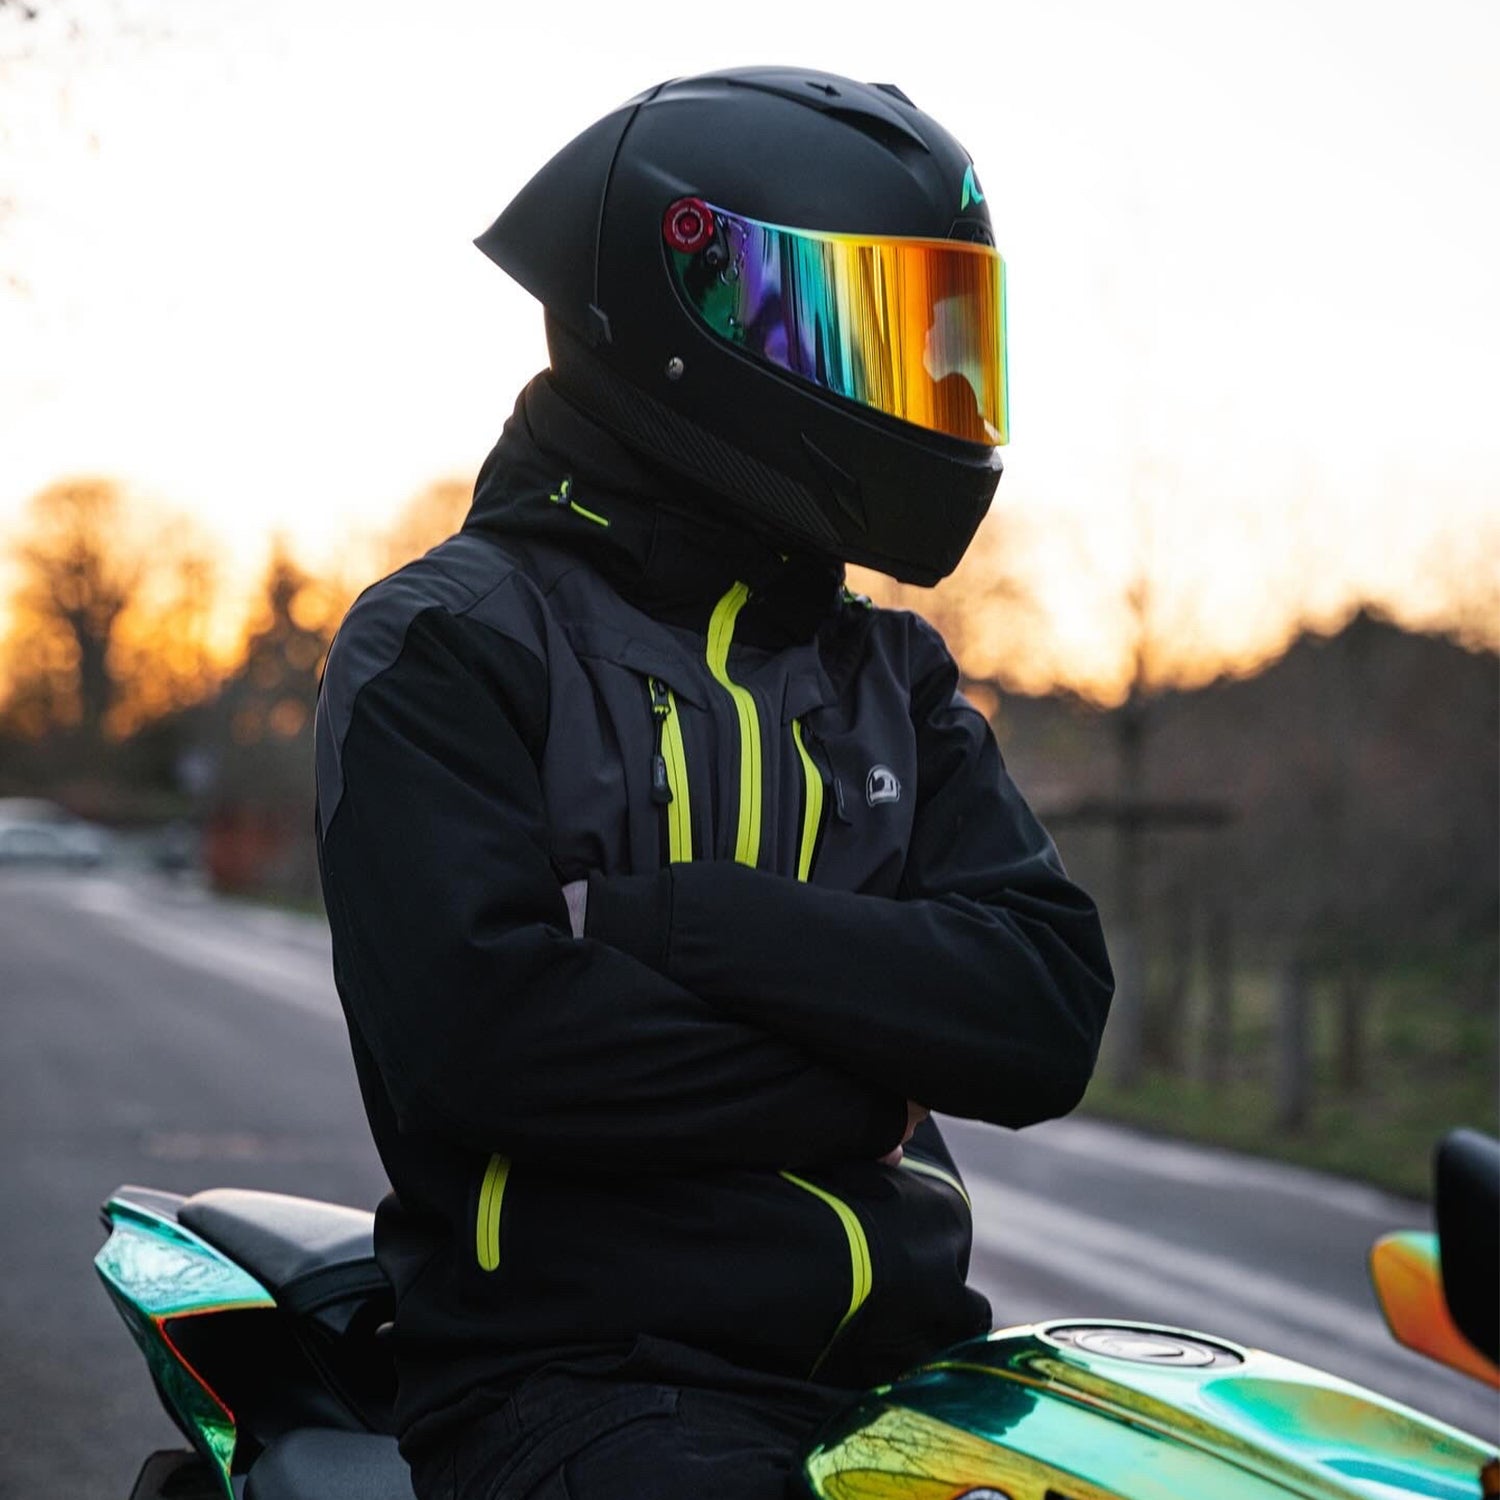 Armored motorcycle protective jacket